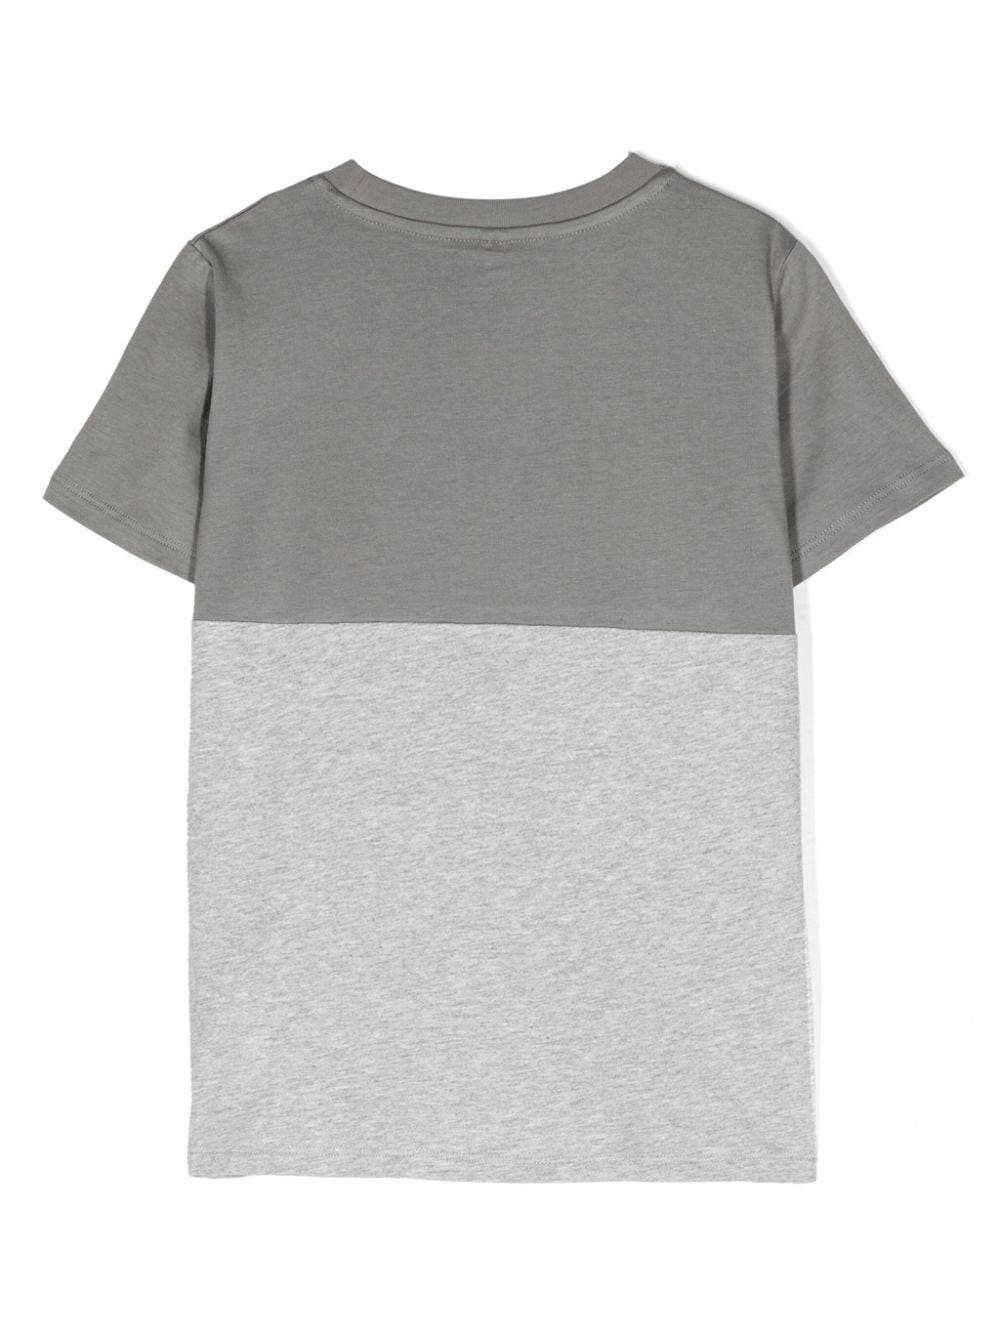 Gray t-shirt for boys with print